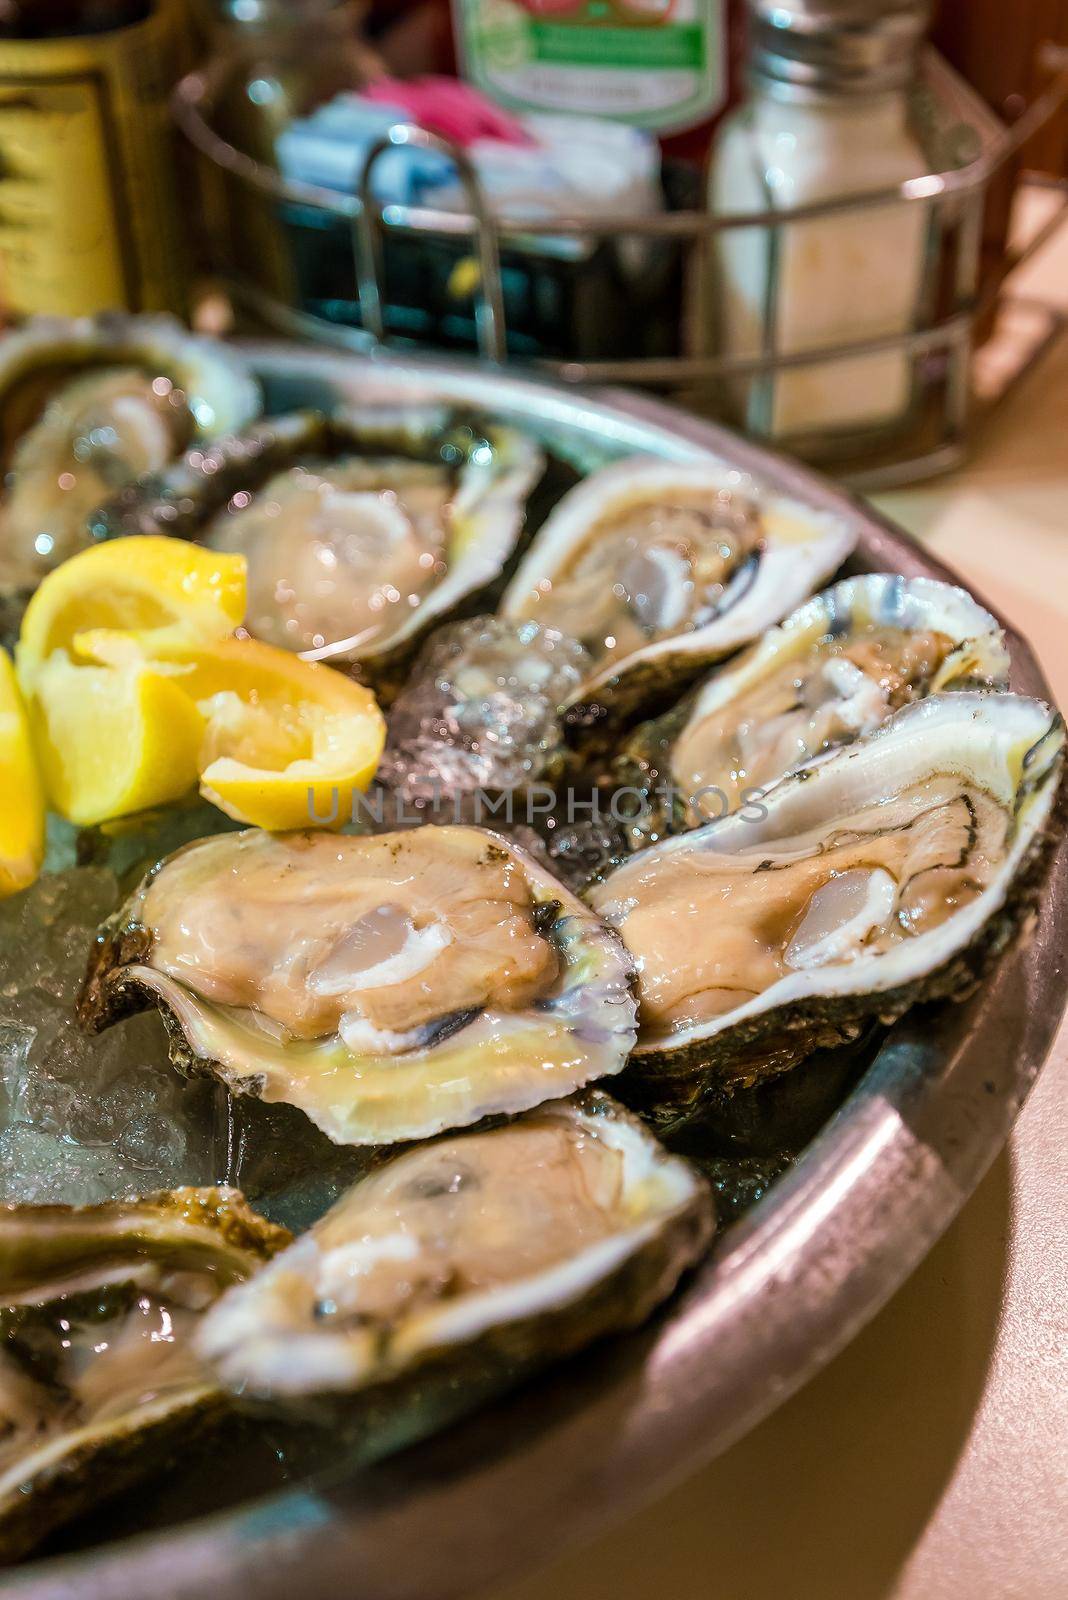 New Orleans oysters by f11photo